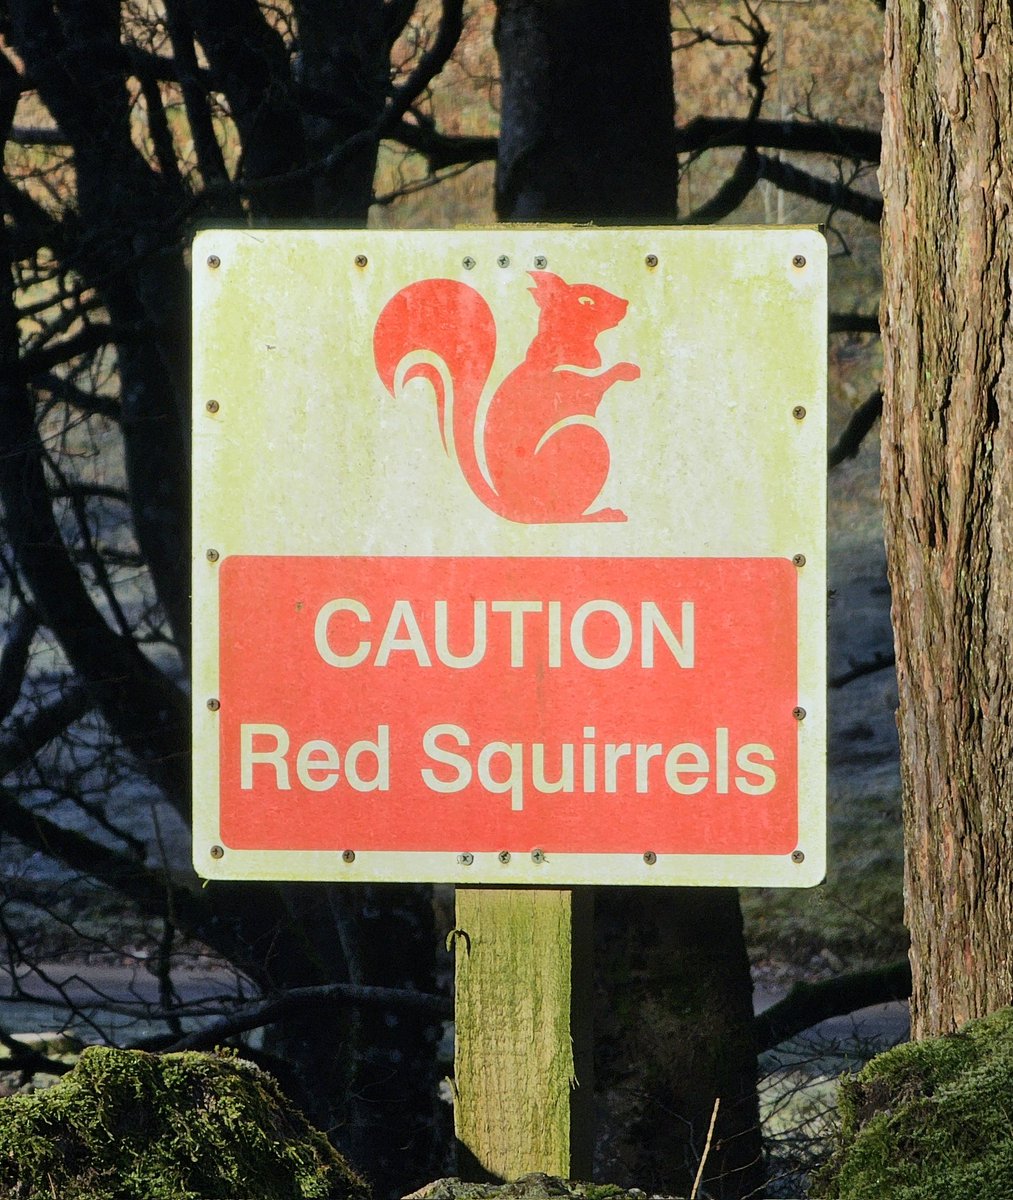 Have spent the week travelling and working in #Scotland. Wonderful projects finished, and new ones just beginning. Even a chance to see a red squirrel. #FreelanceLife #Edinburgh #Perth #Glenesk #FreelanceConservator